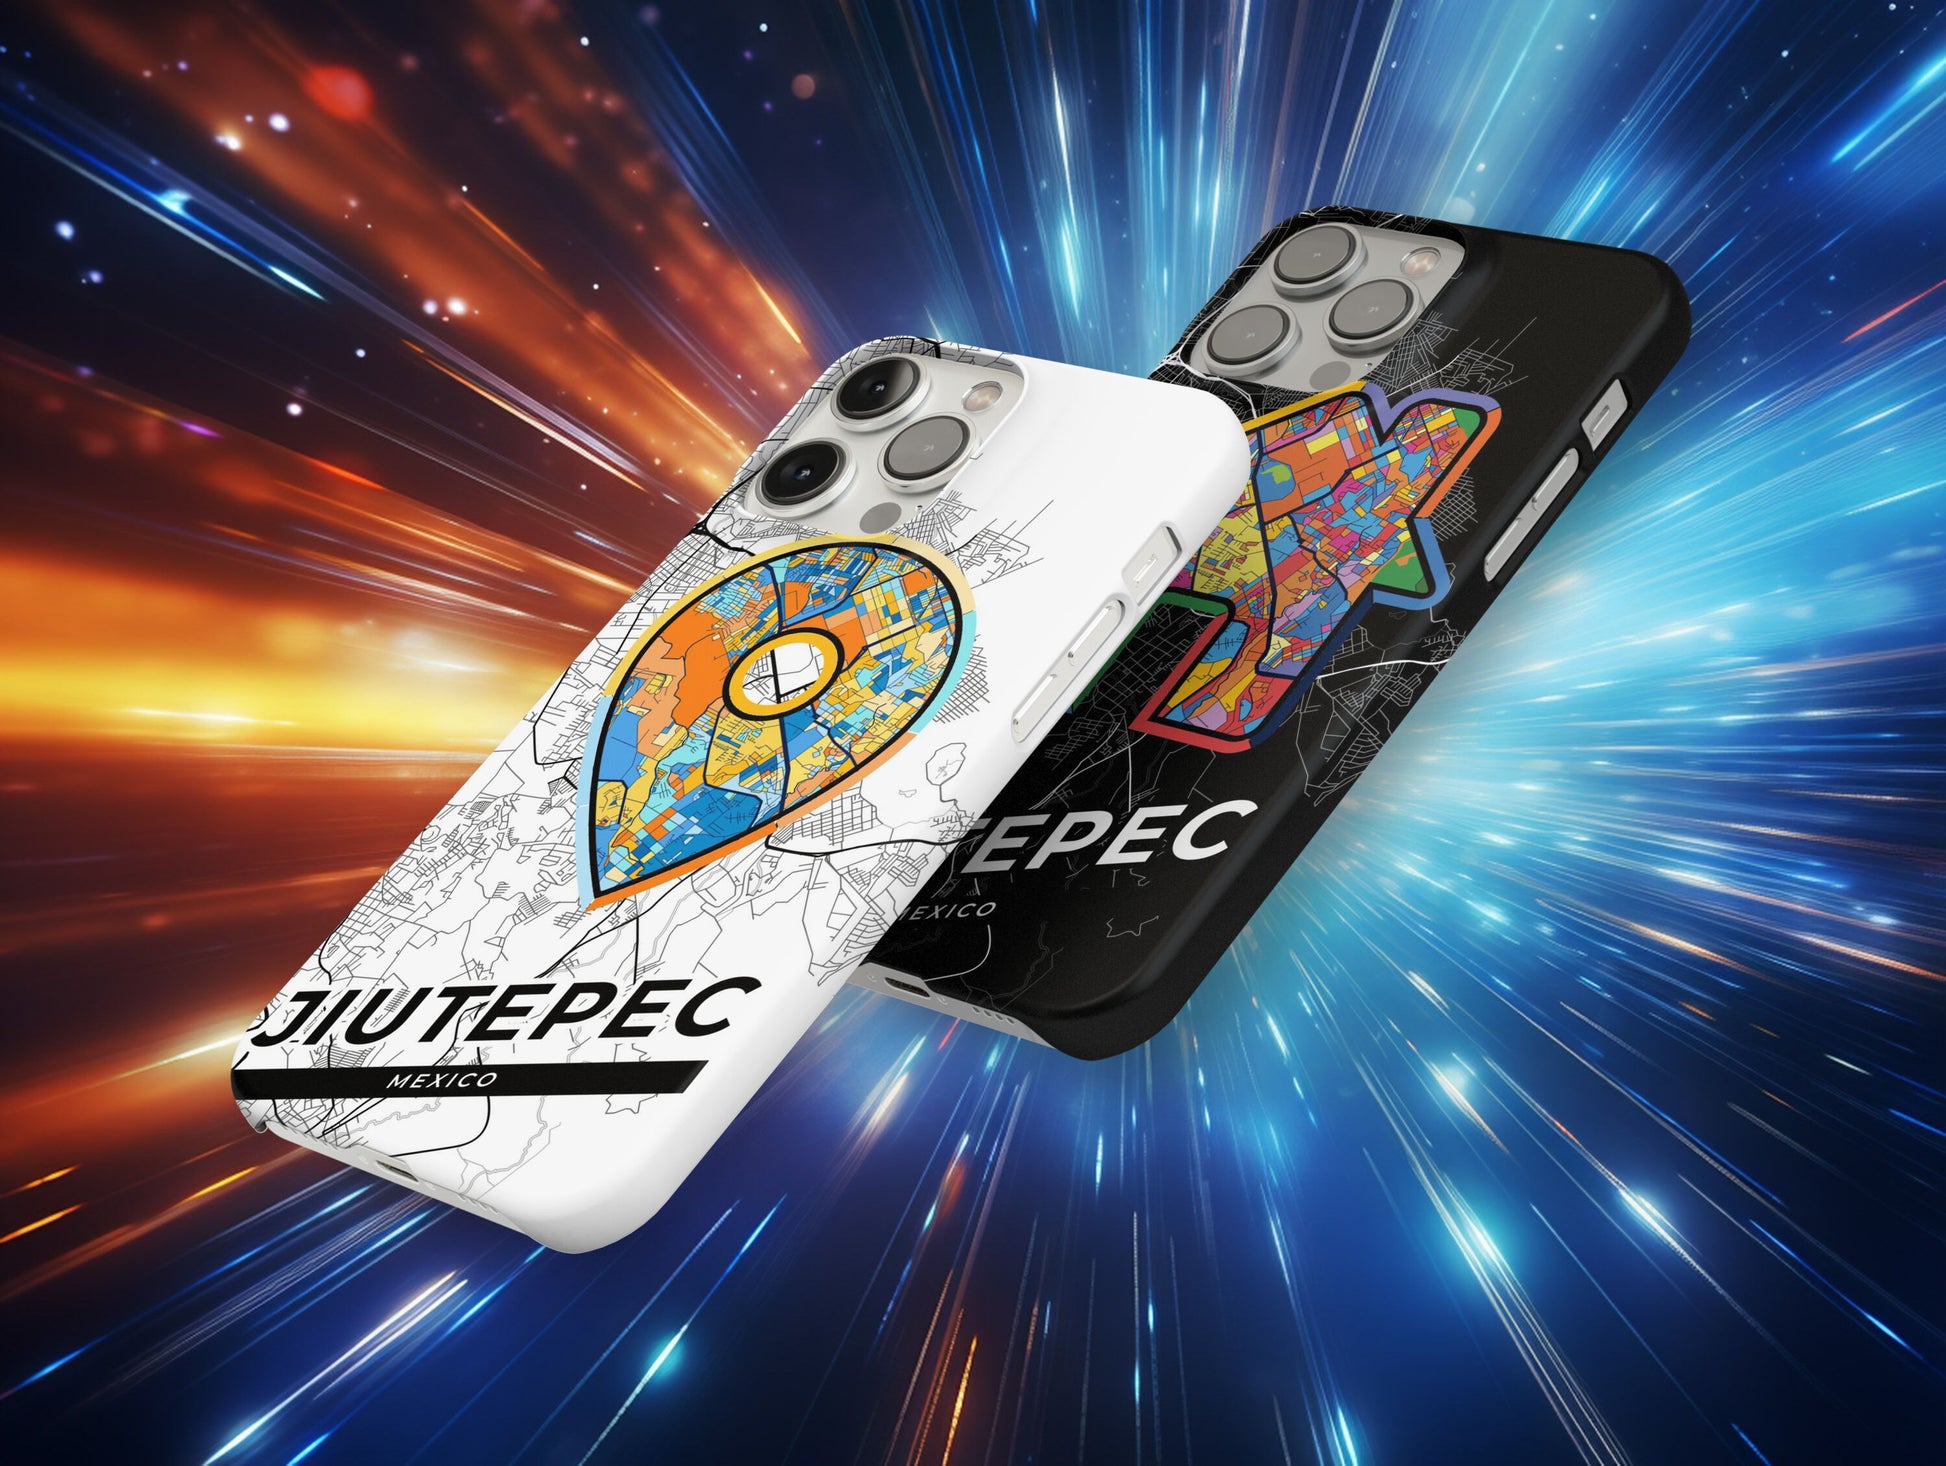 Jiutepec Mexico slim phone case with colorful icon. Birthday, wedding or housewarming gift. Couple match cases.